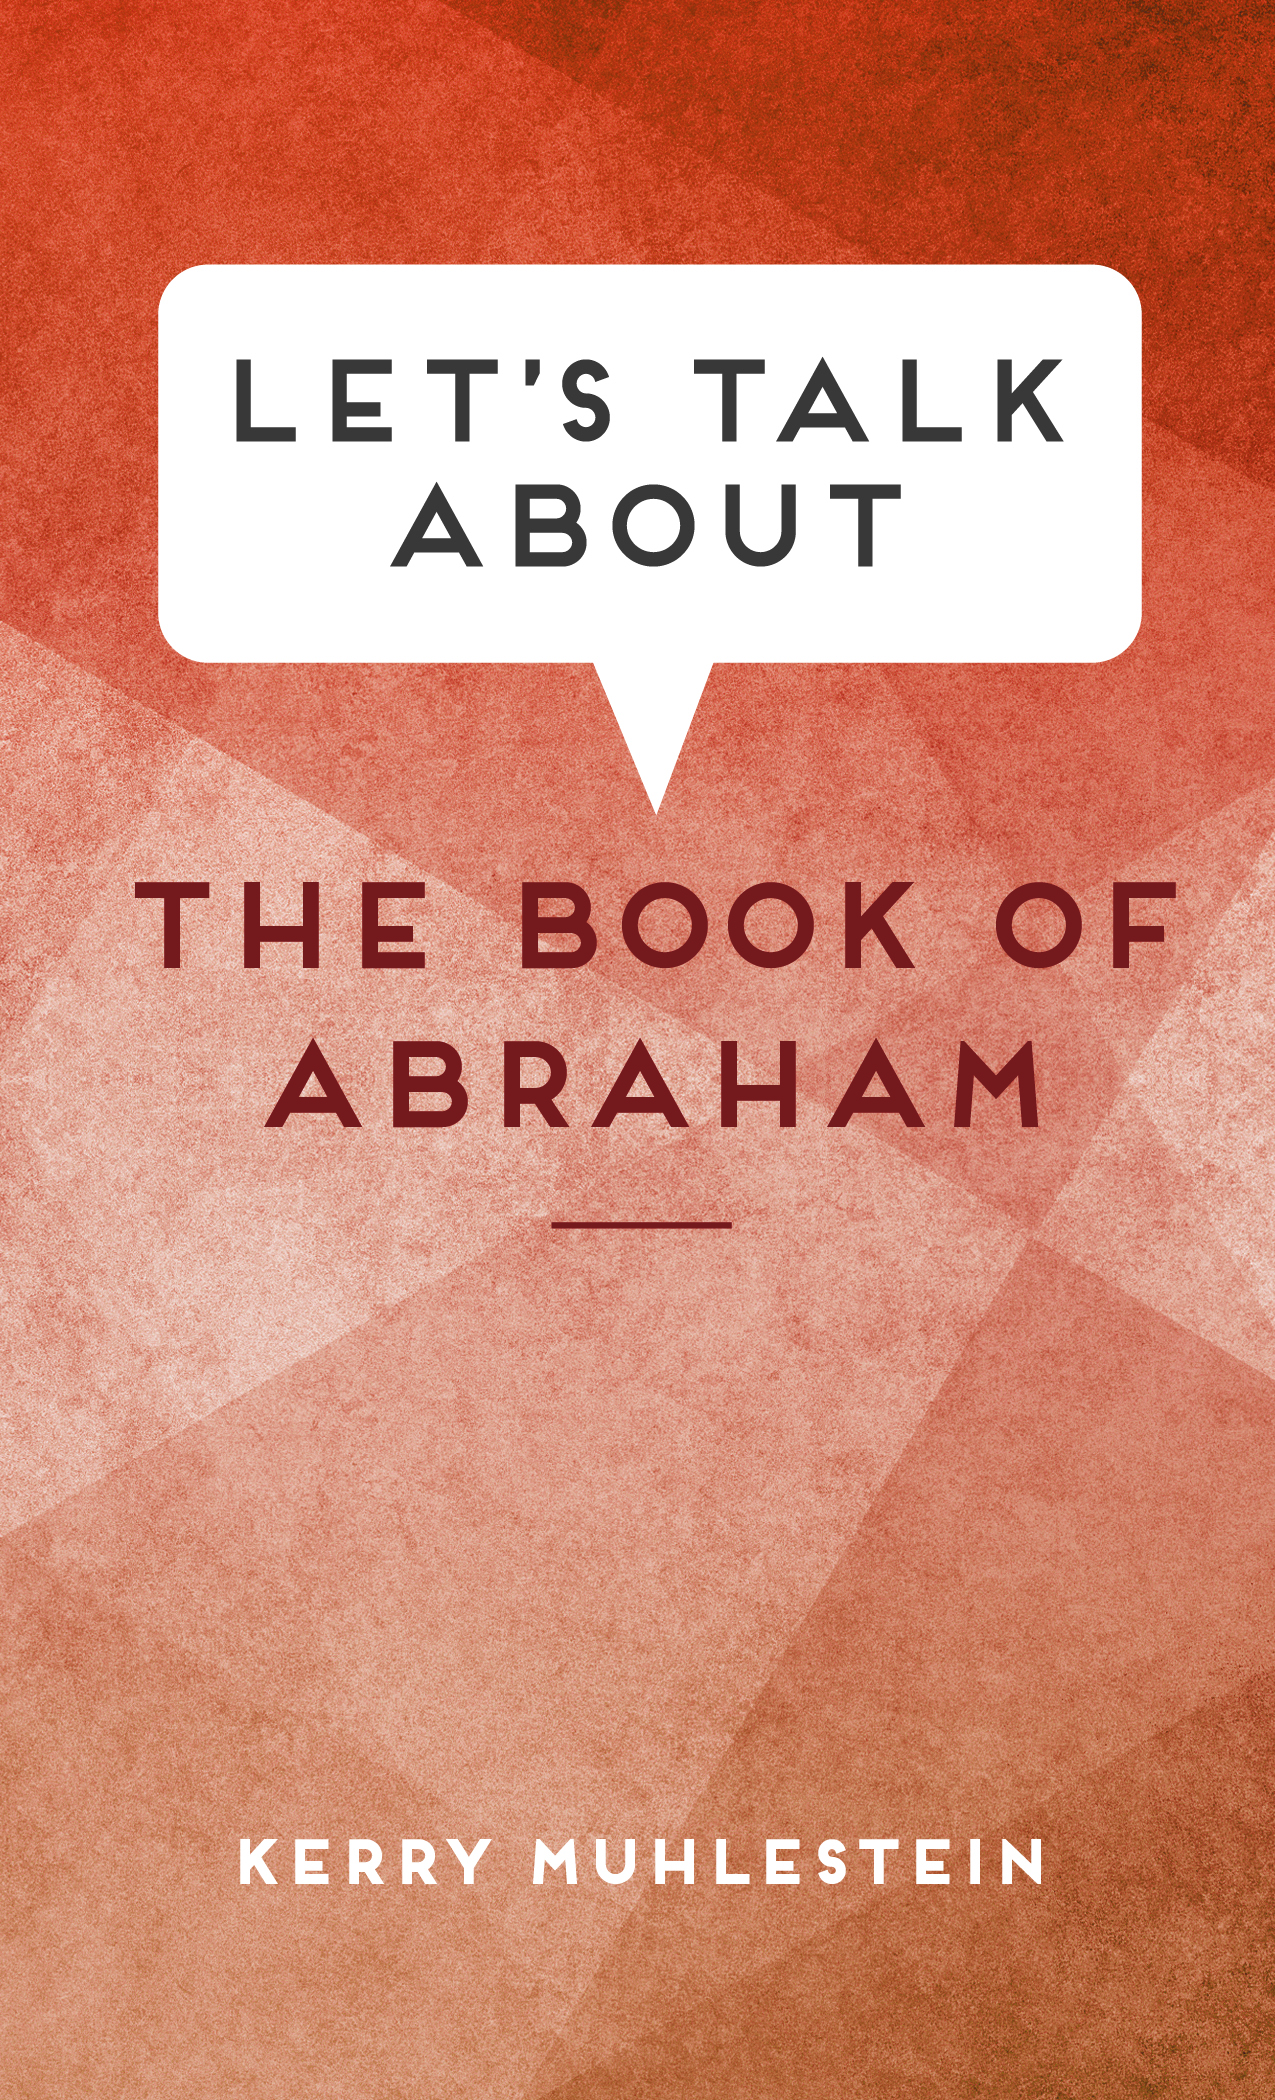 Let's Talk about series_Book of Abraham_cover mockup